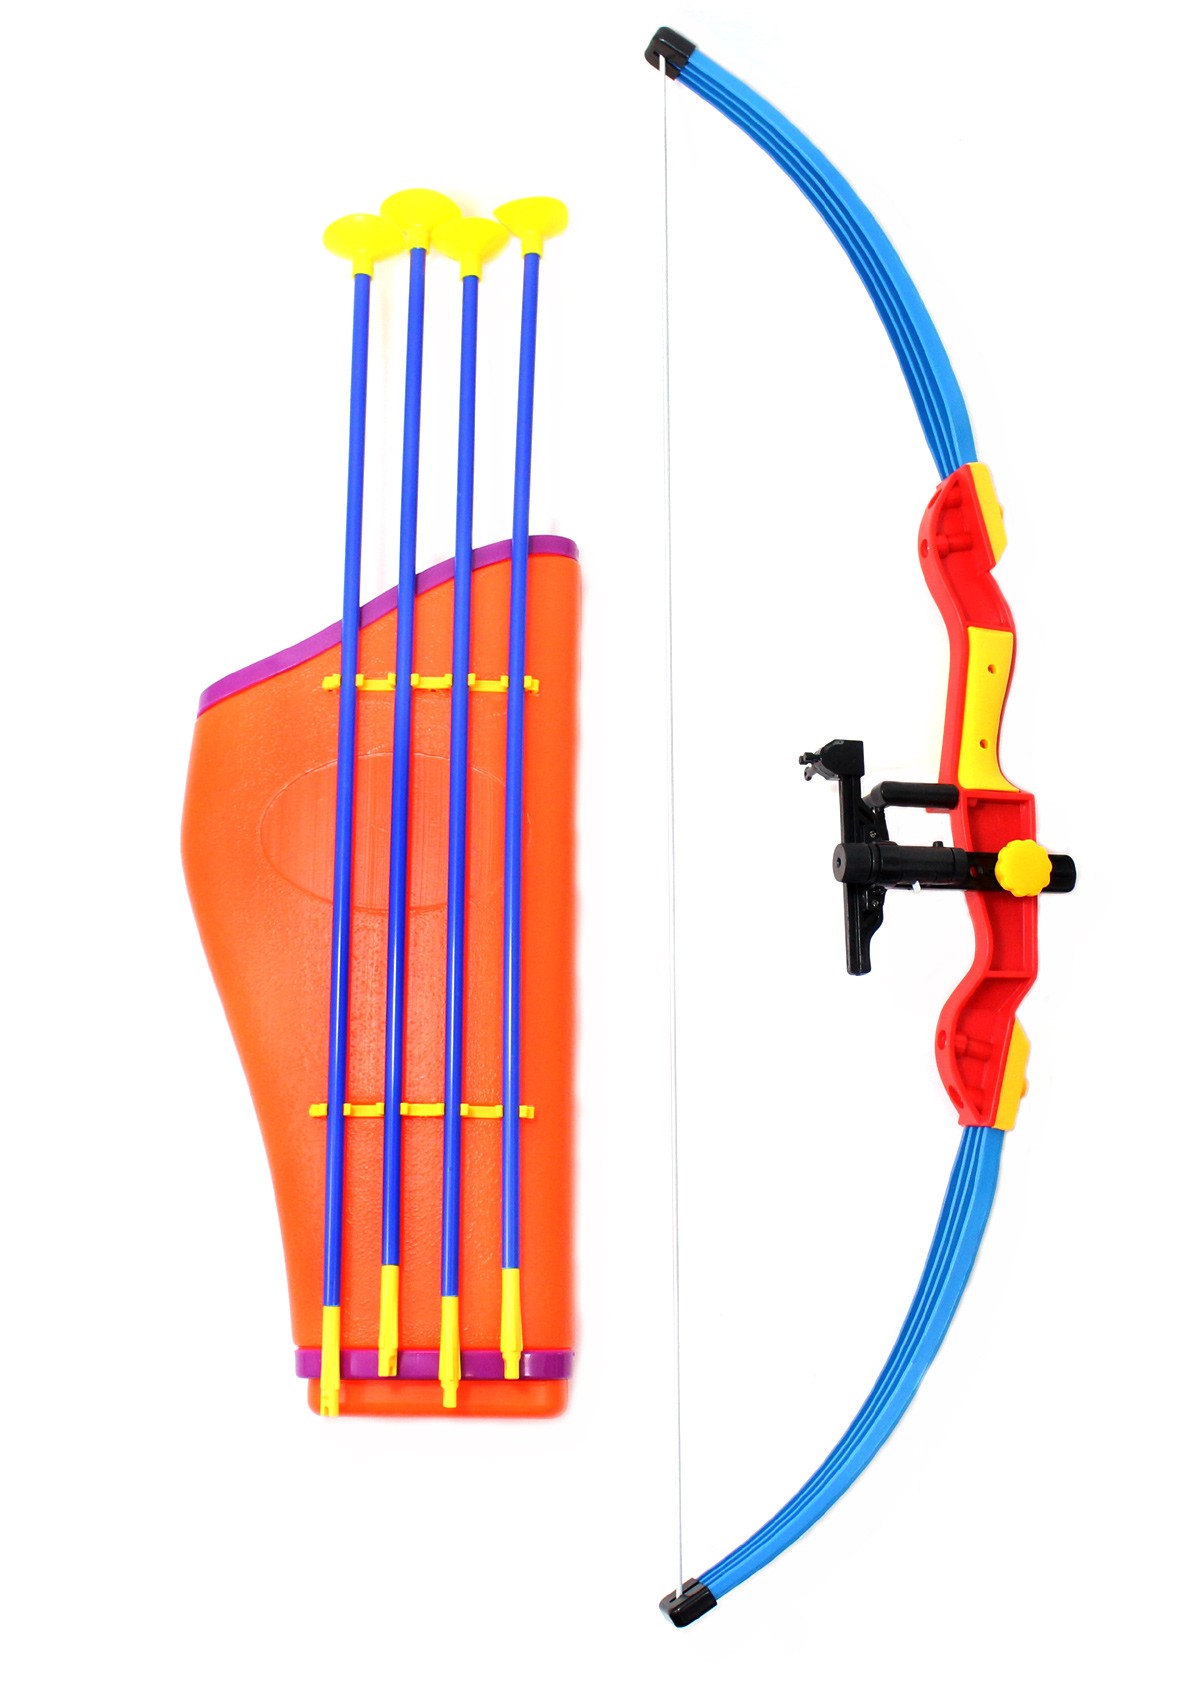 Kings Sport 32" Toy Archery Bow And Arrow Set For Kids - Four Suction Cup Arrows